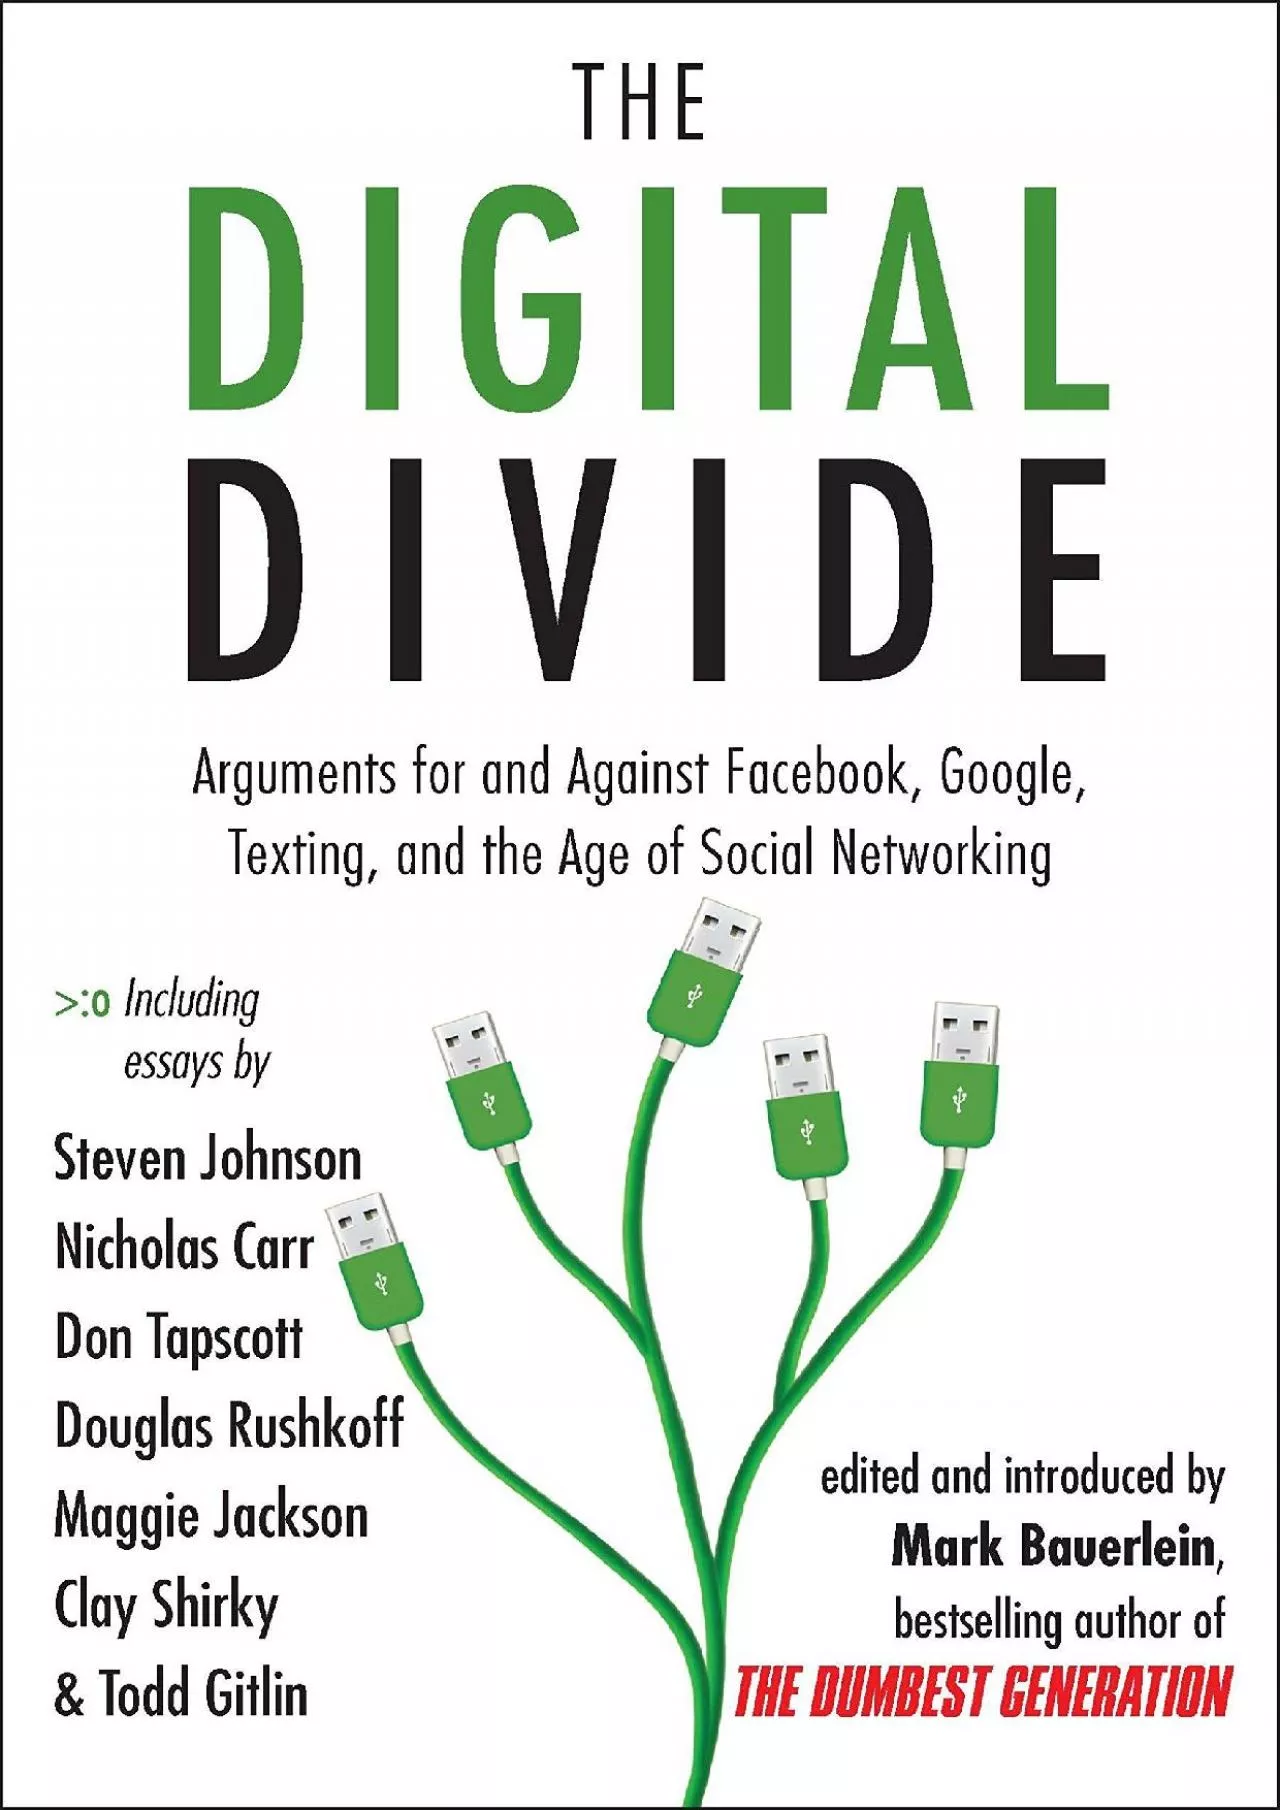 The Digital Divide: Arguments for and Against Facebook, Google, Texting, and the Age of